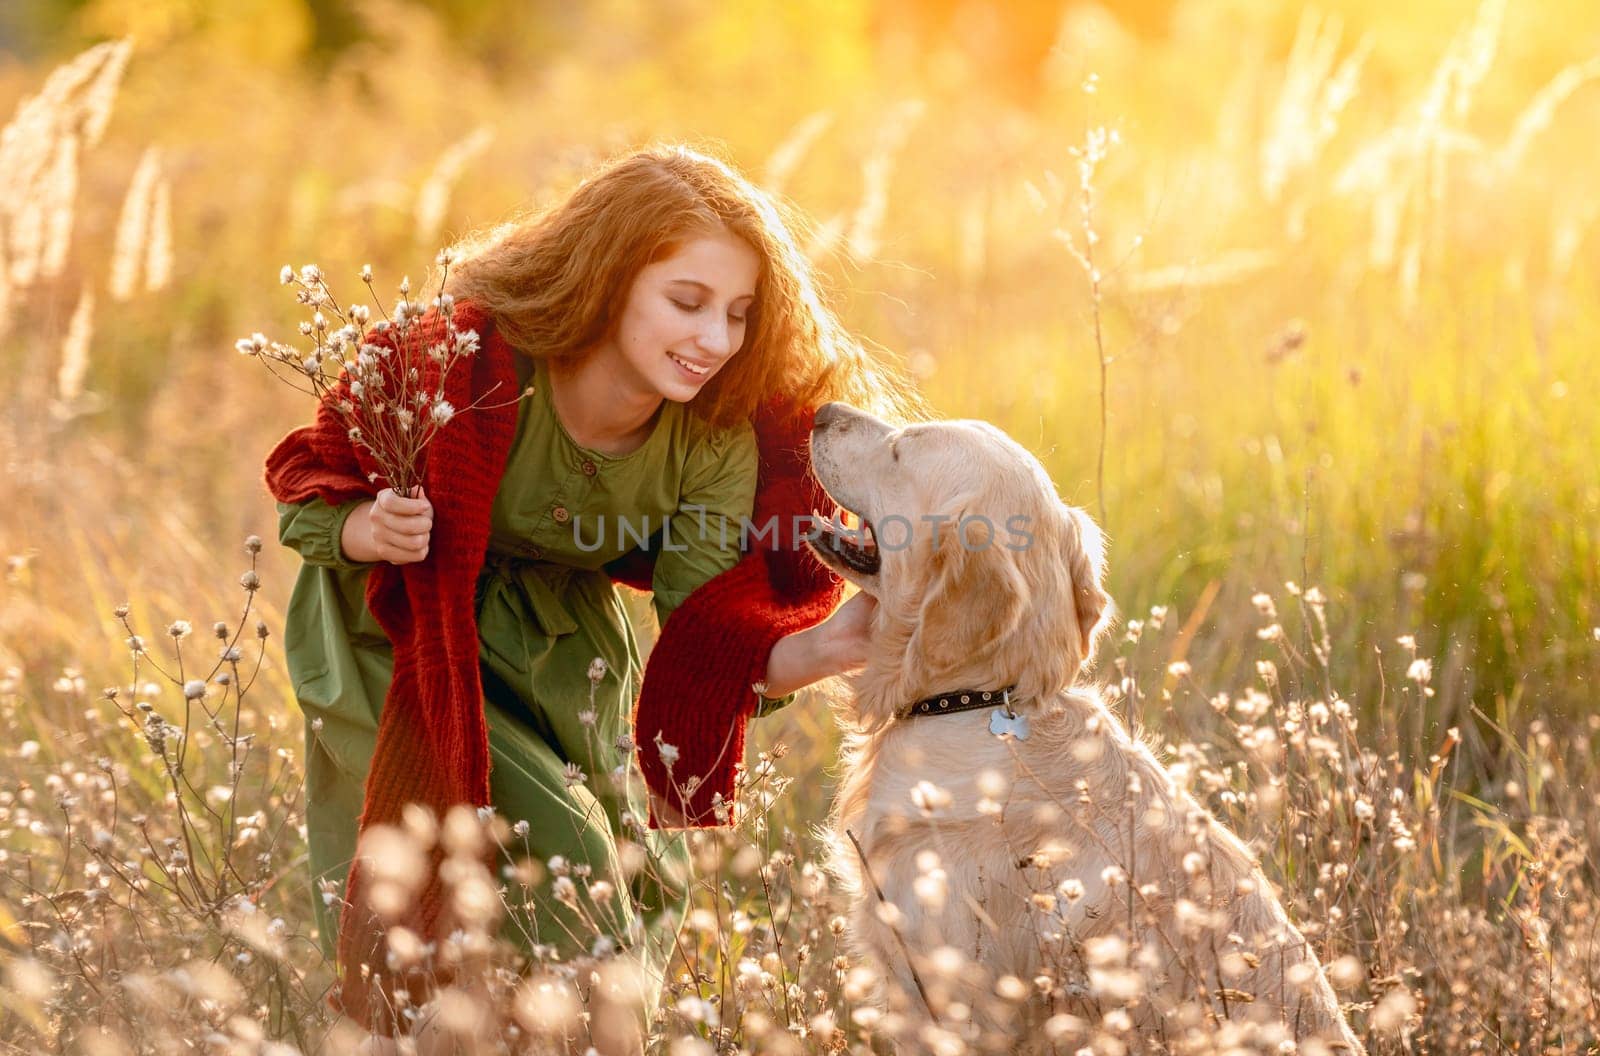 Young girl petting dog in nature by tan4ikk1